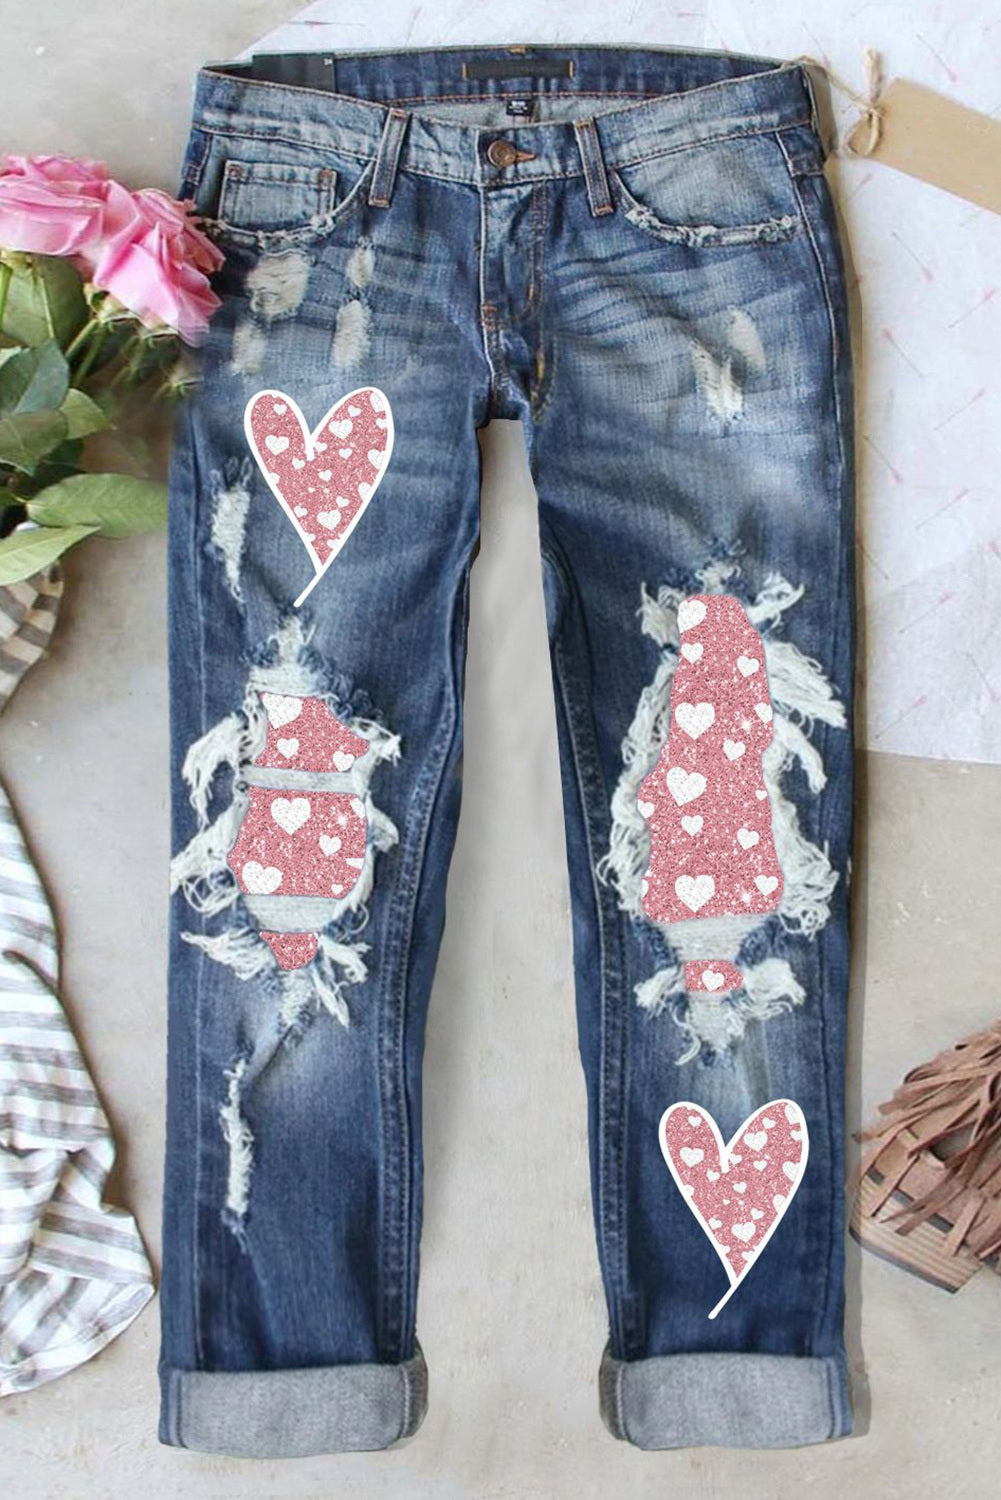 Love Heart Solid Heart-shaped Shift Casual Jeans $ 41.99 - Evaless